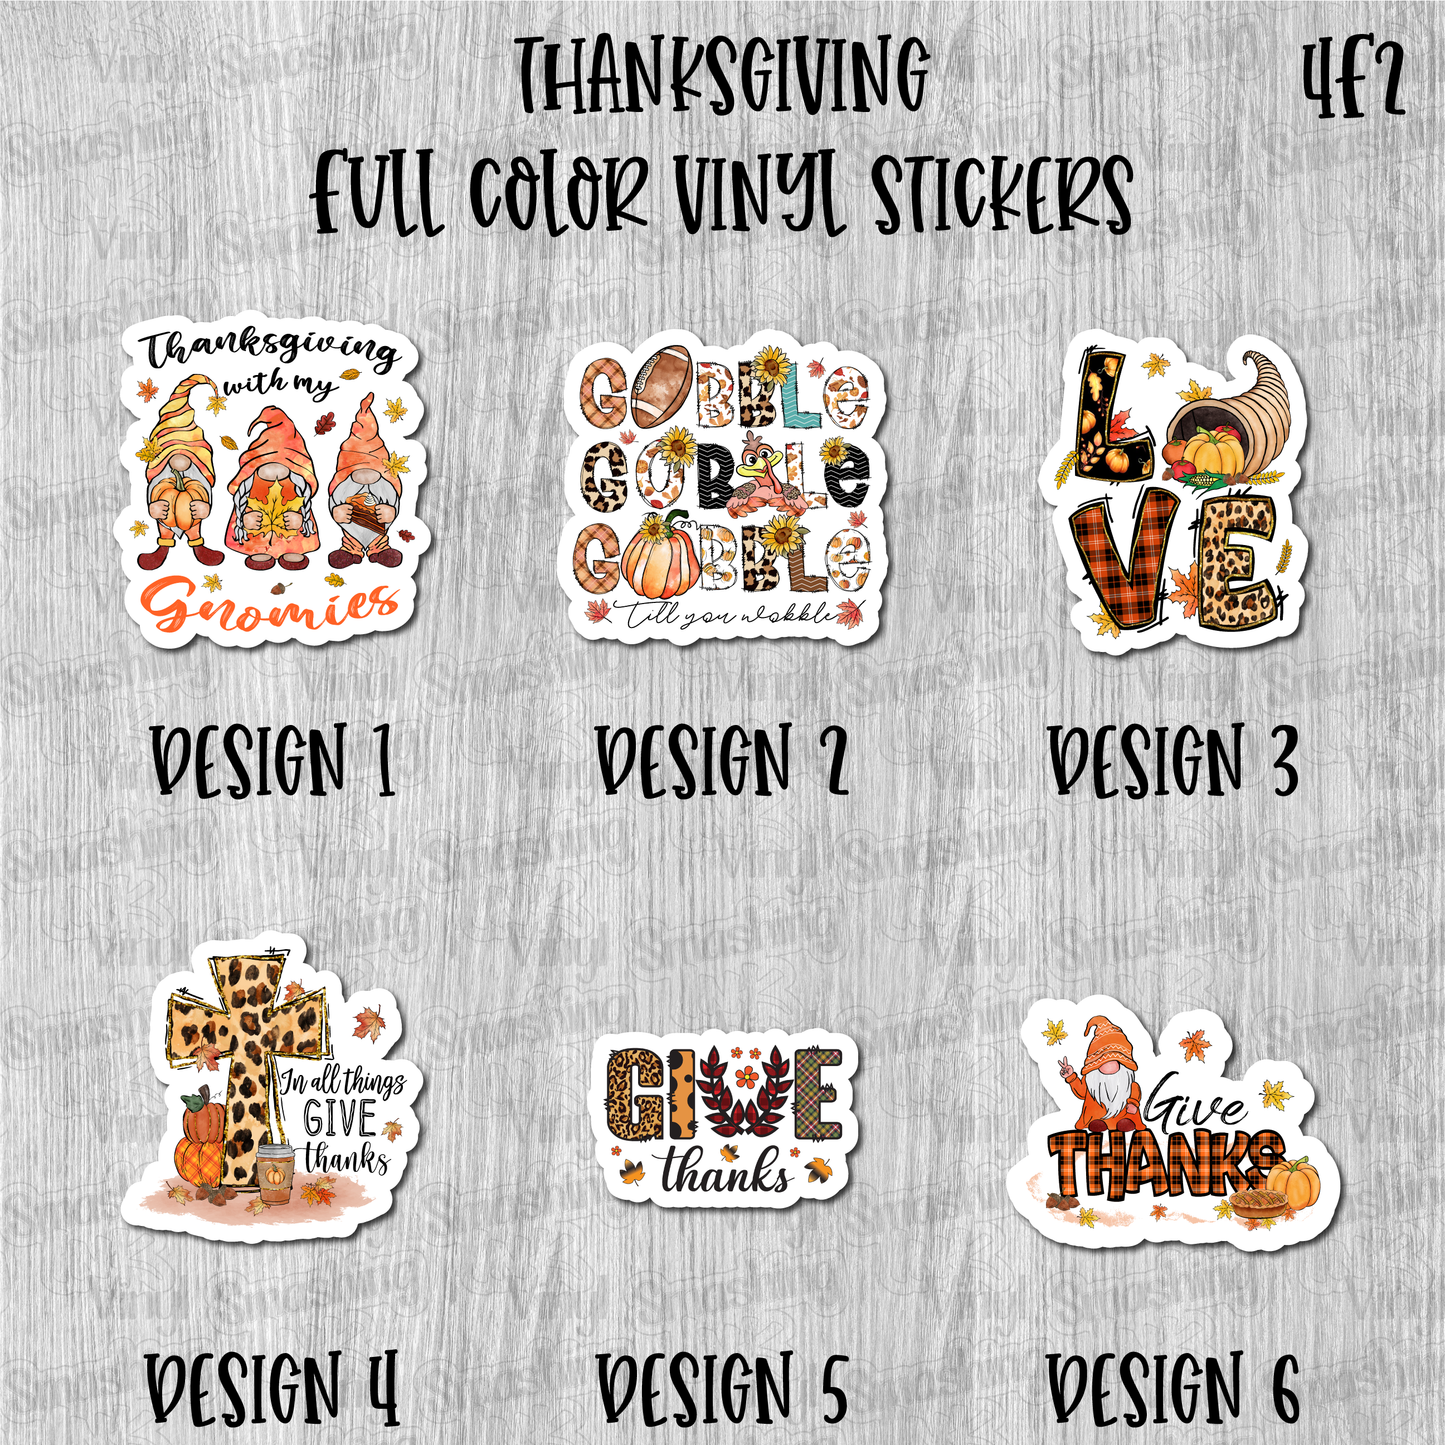 Thanksgiving - Full Color Vinyl Stickers (SHIPS IN 3-7 BUS DAYS)